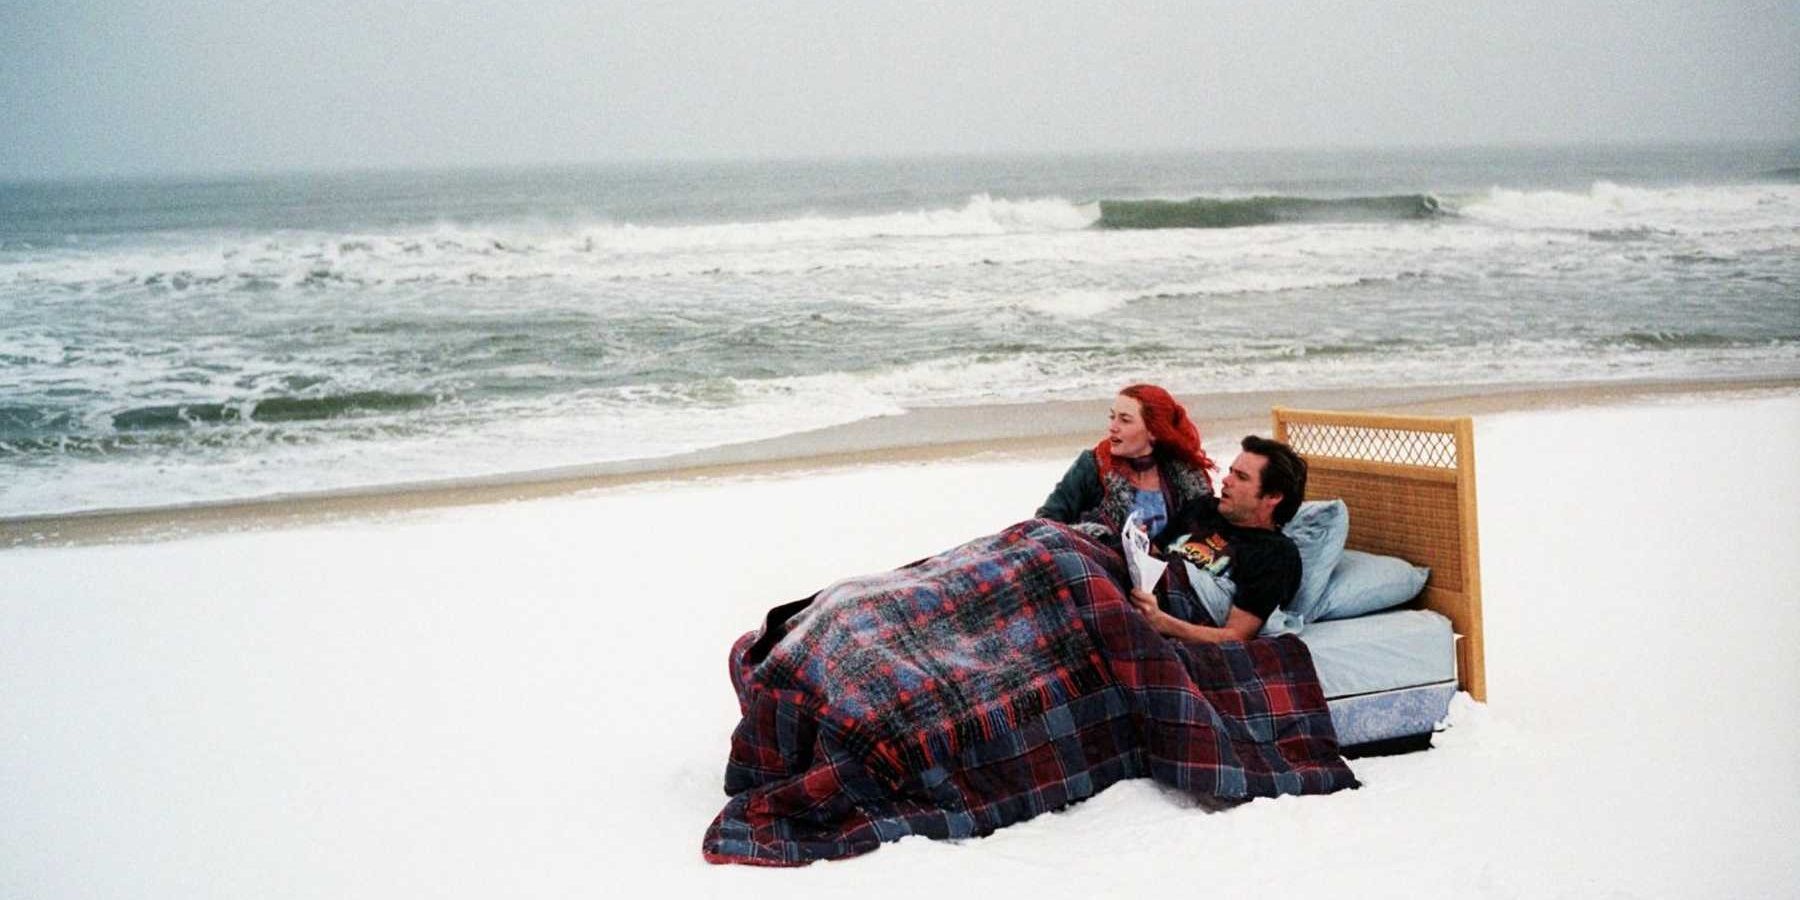 Joel and Clementine in bed on a beach